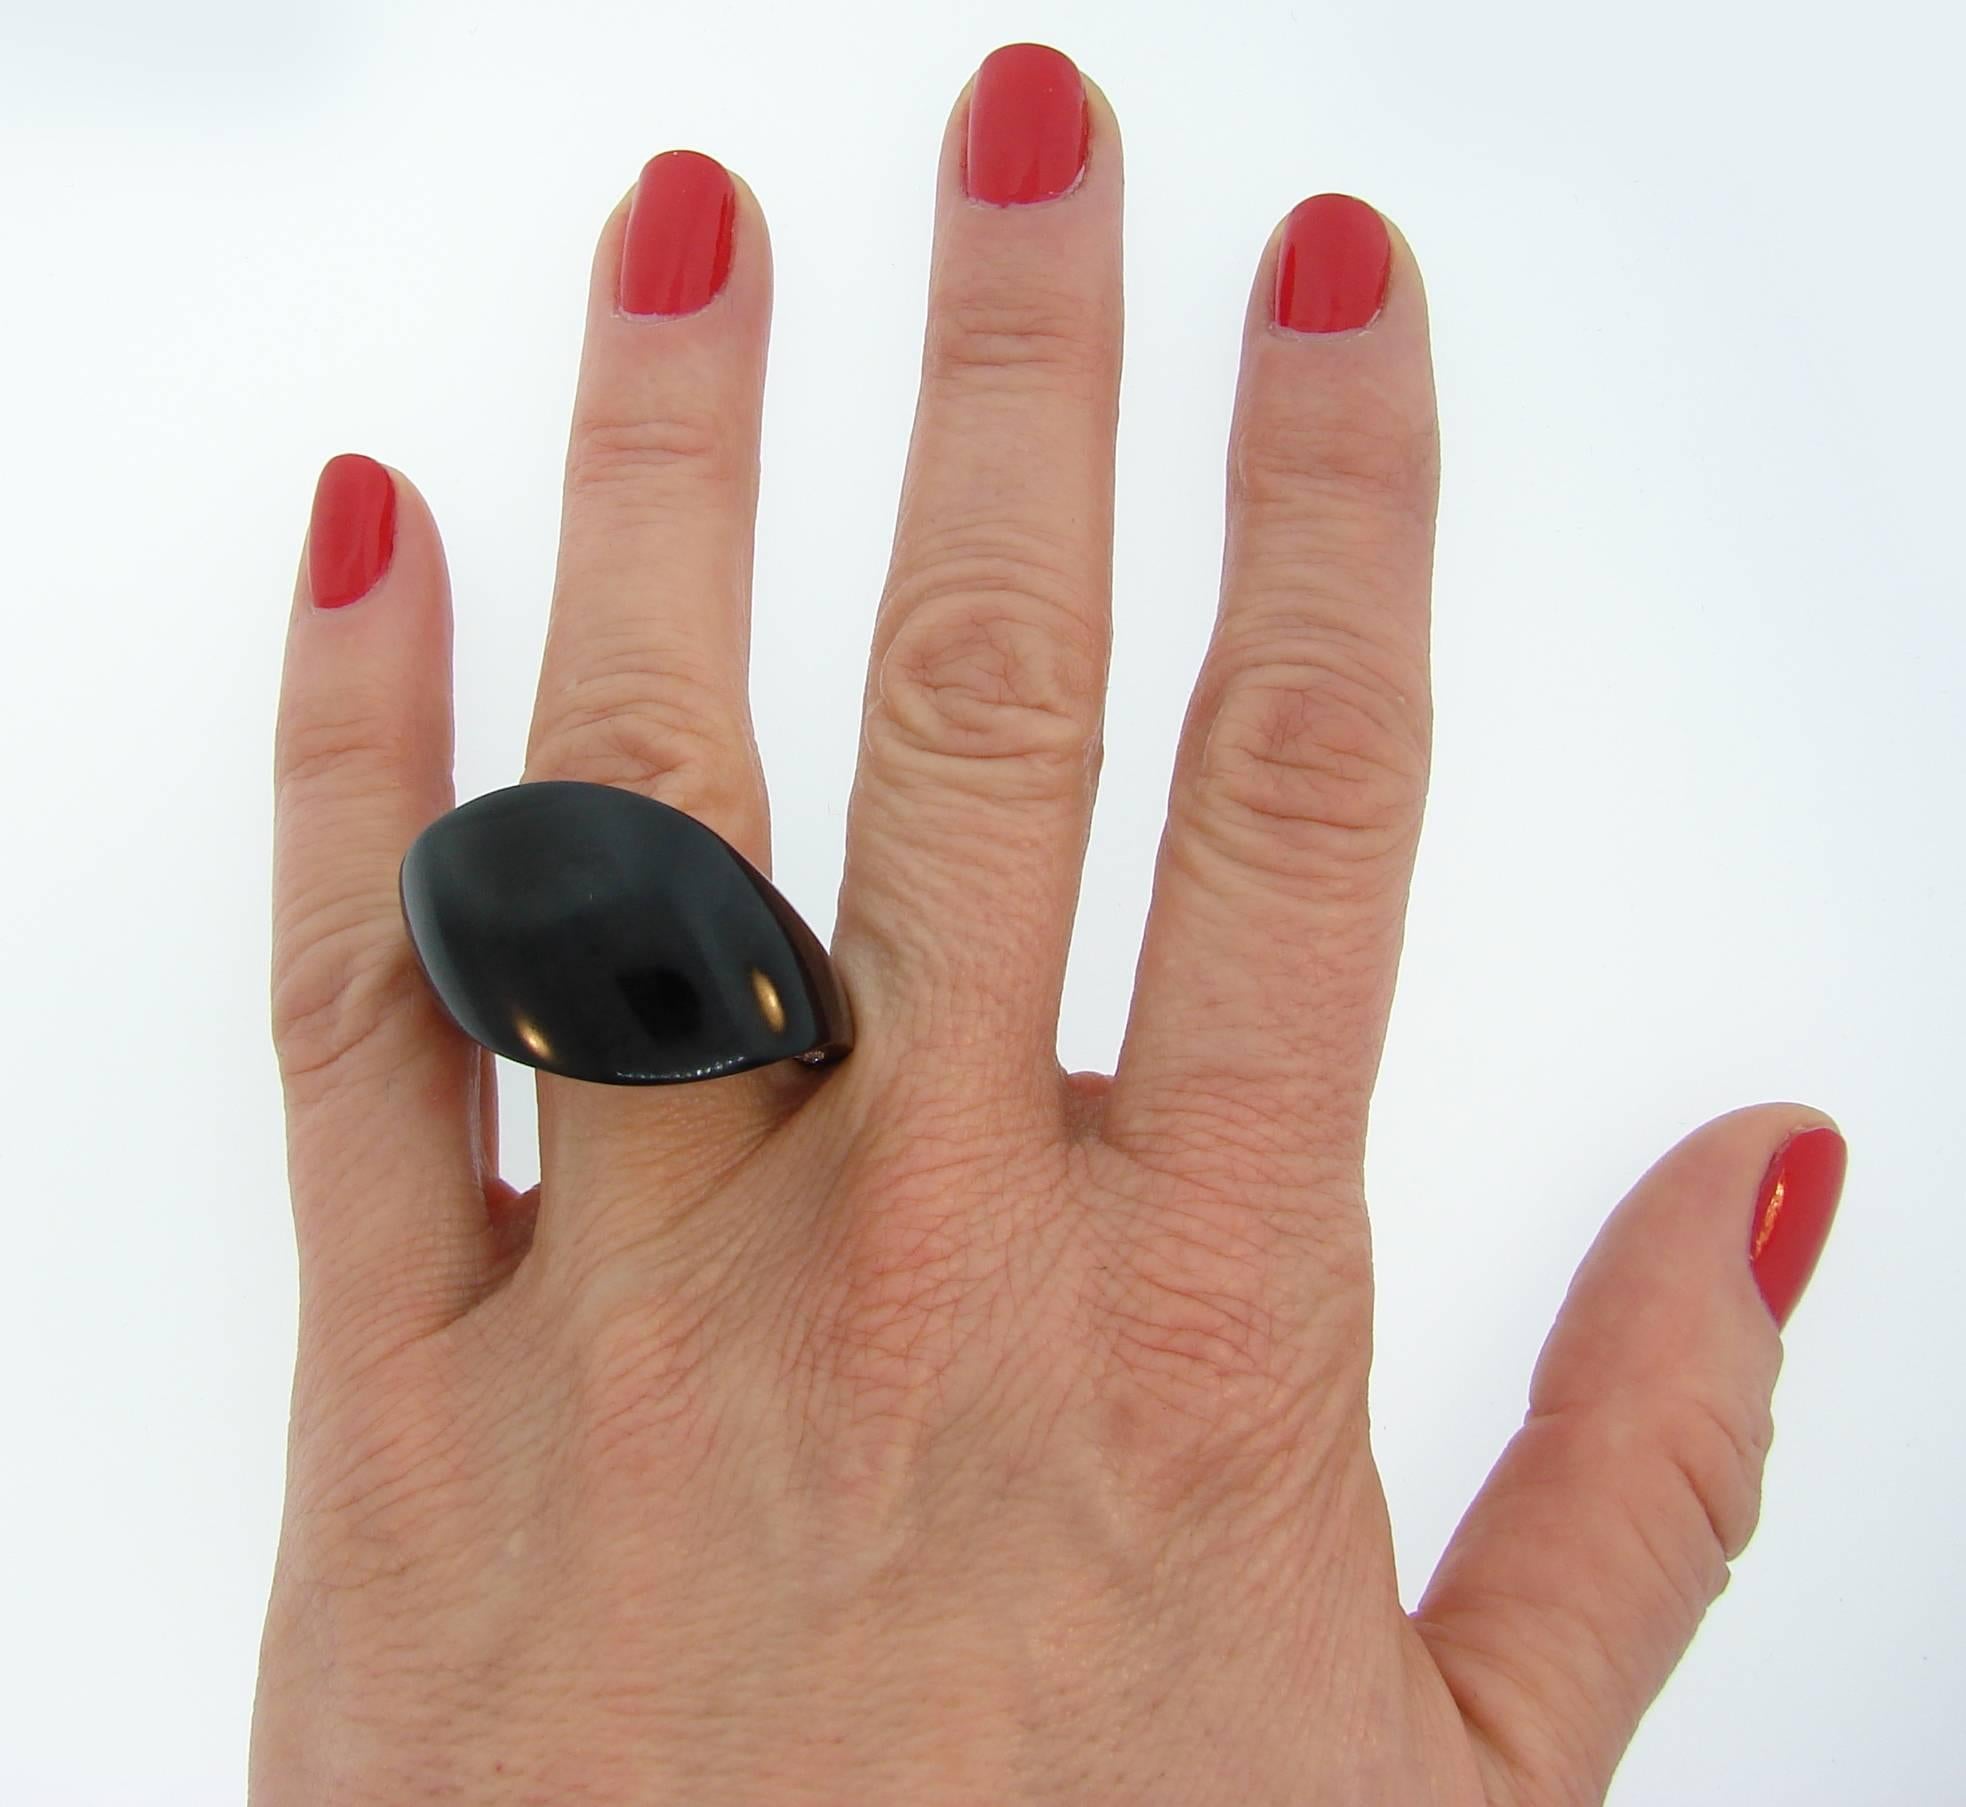 Stunning cocktail ring created by Italian jewelry House Vhernier. Beautiful shape, perfect lines, contrast of white sparkle of diamonds with sleek black jet are the highlights of this chic ring. Bold yet wearable, the ring is a great addition to